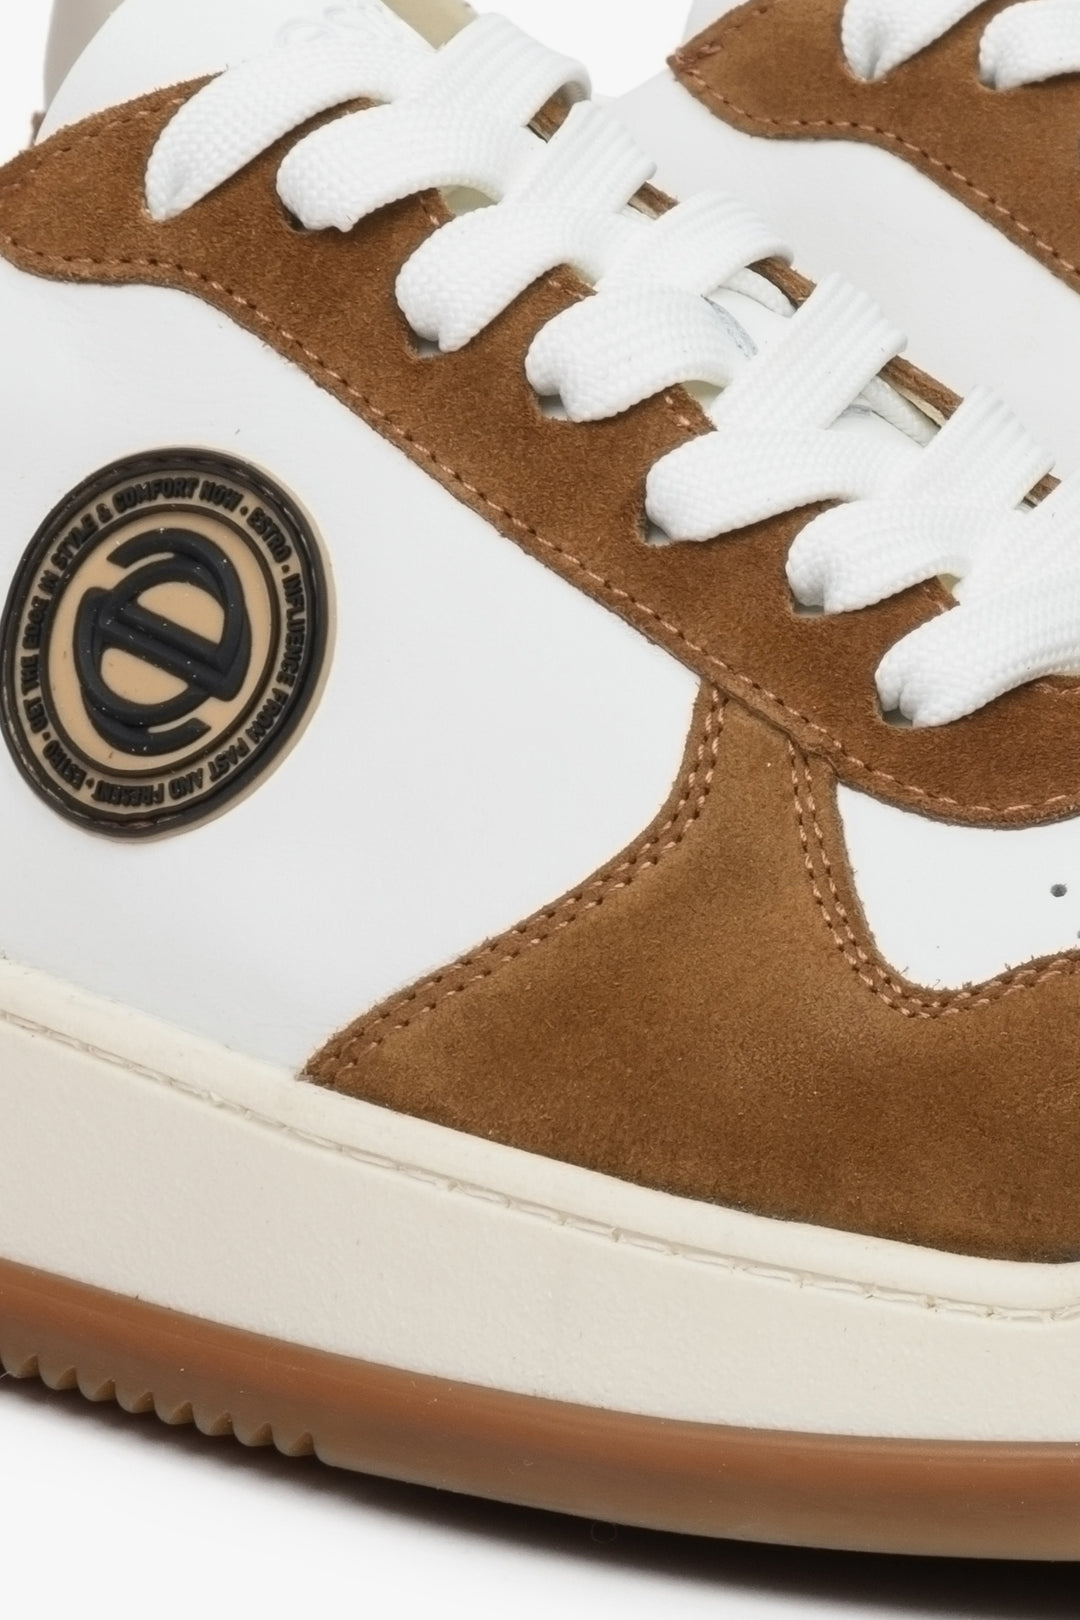 Men's sneakers in suede and leather, brown and white - close-up of details.